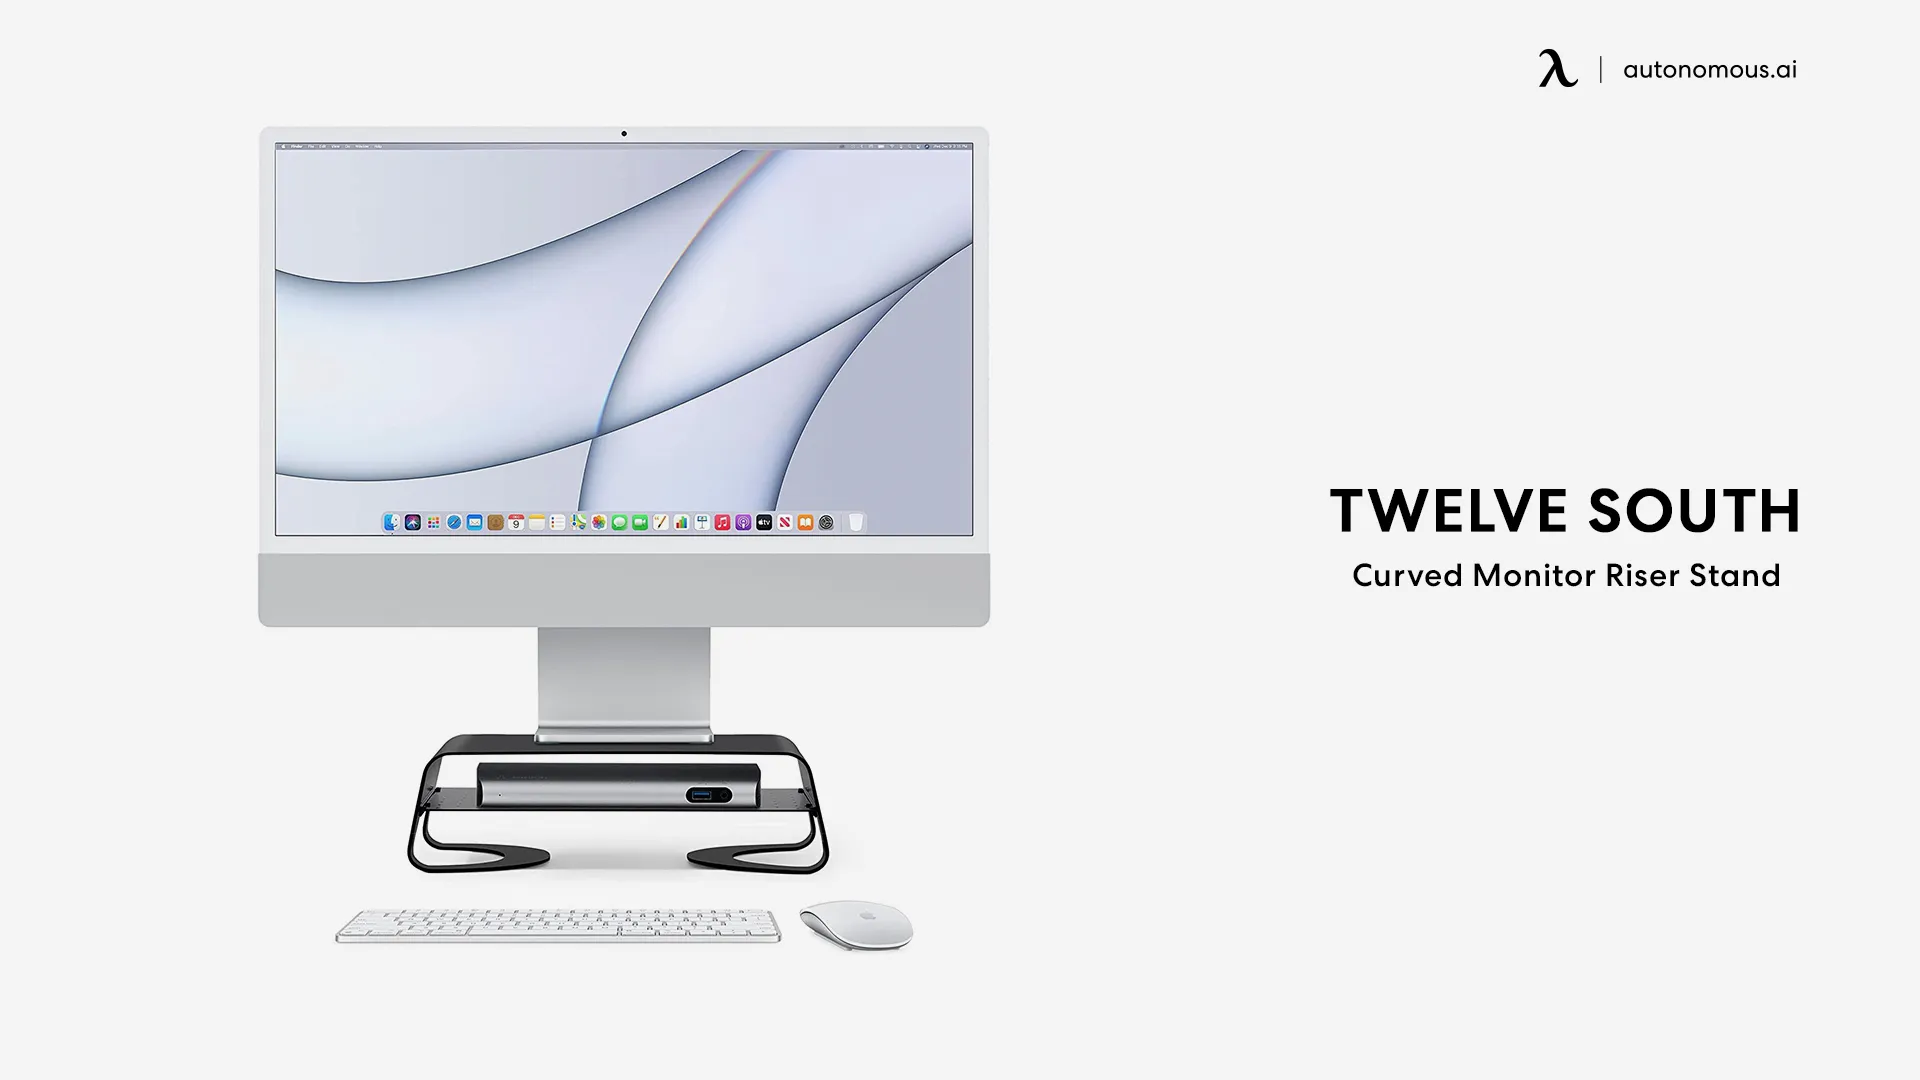 Curved Monitor Riser Stand by Twelve South